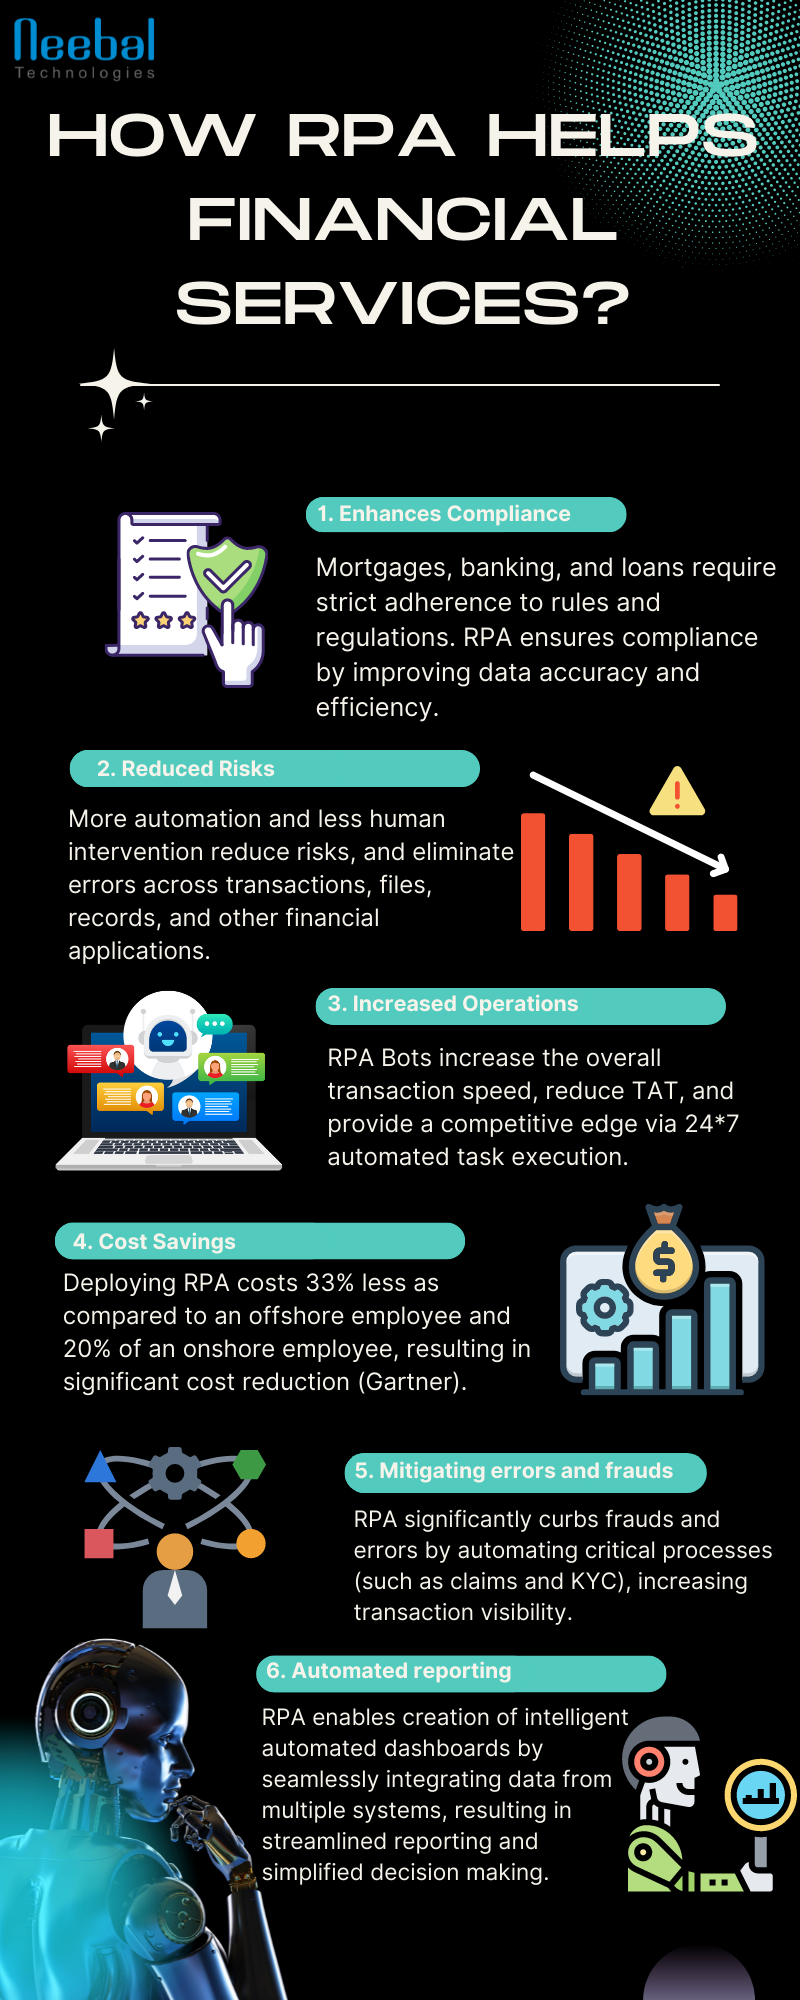 How RPA helps Financial Services